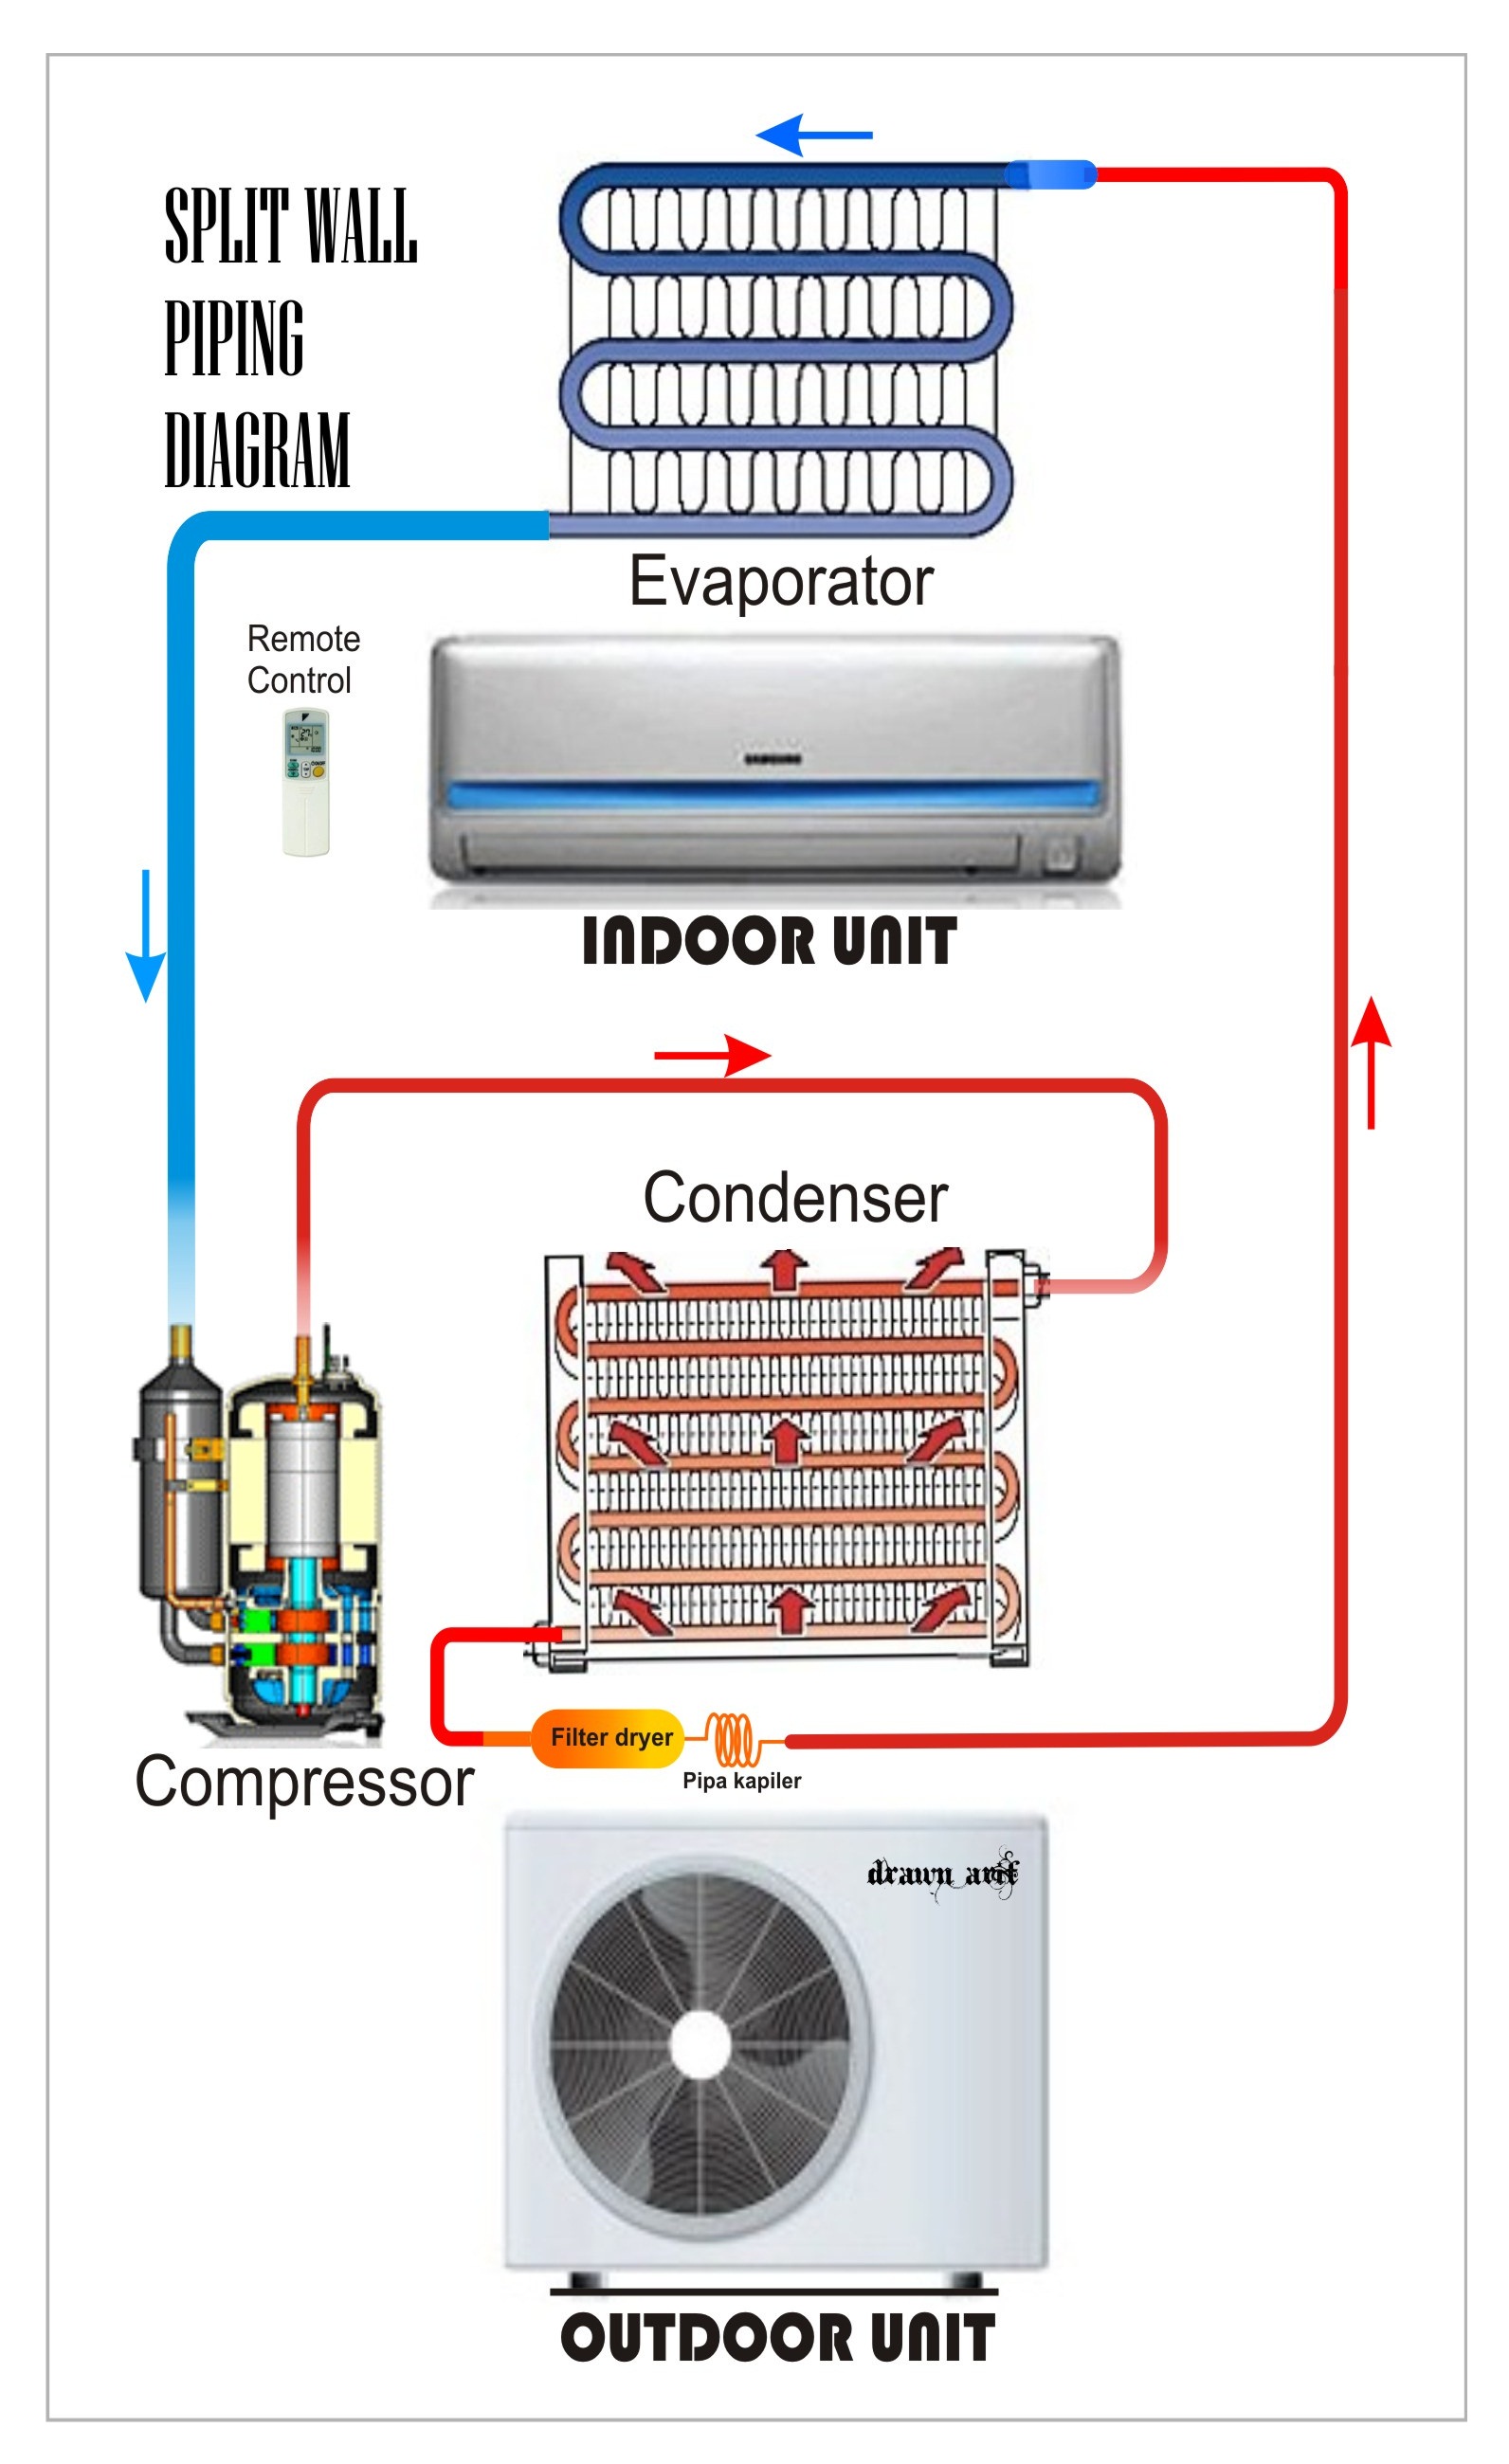 Diagram Air Conditioning Wiring Diagram Full Version Hd Quality Wiring Diagram Guidedwiringk Masterspettacolo It